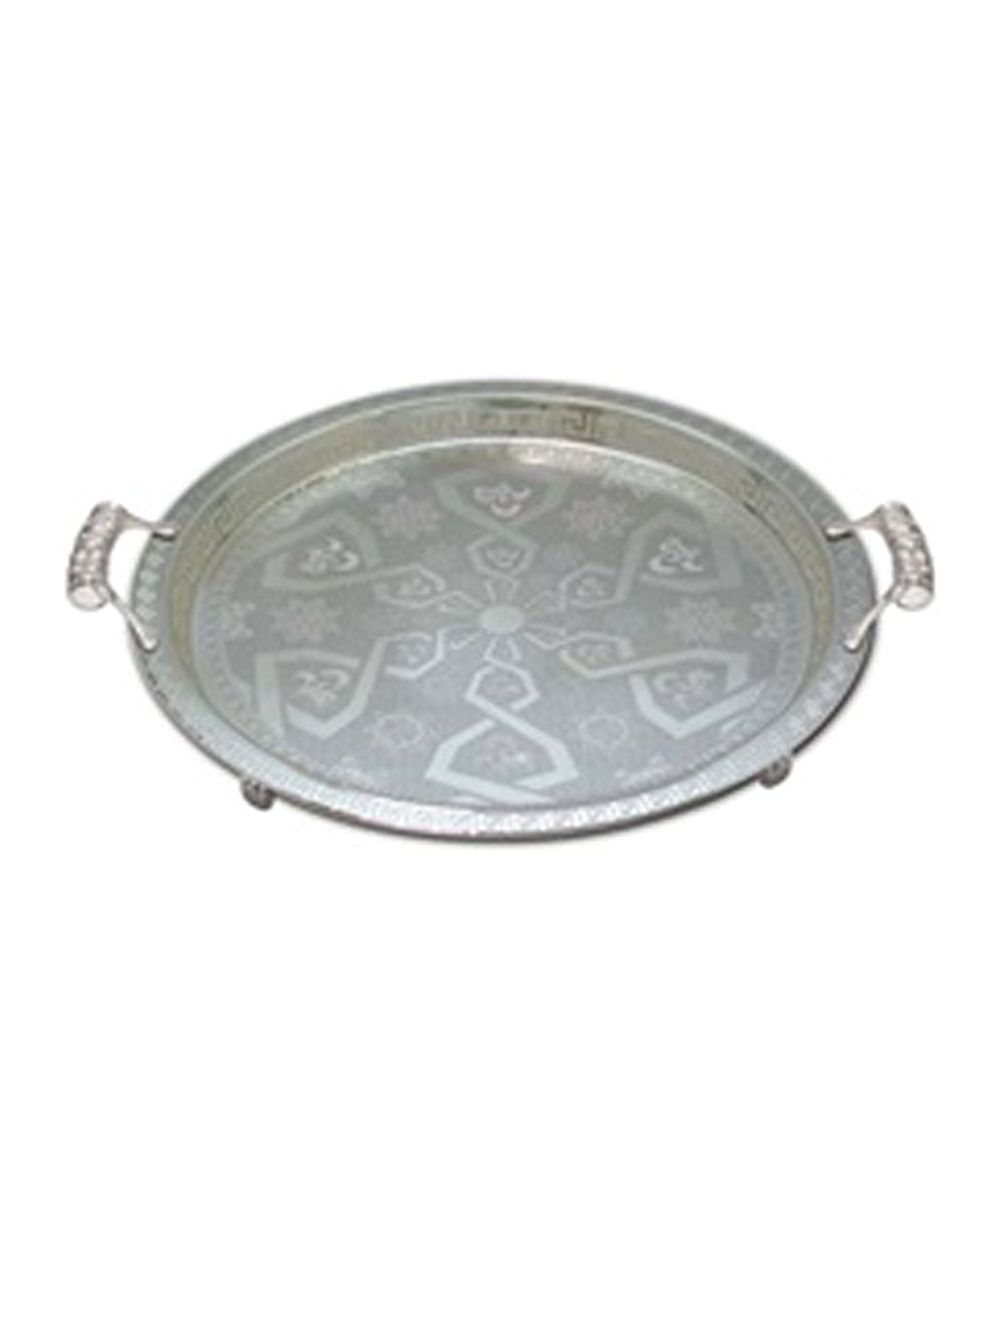 Tray Silver Plated Round Design